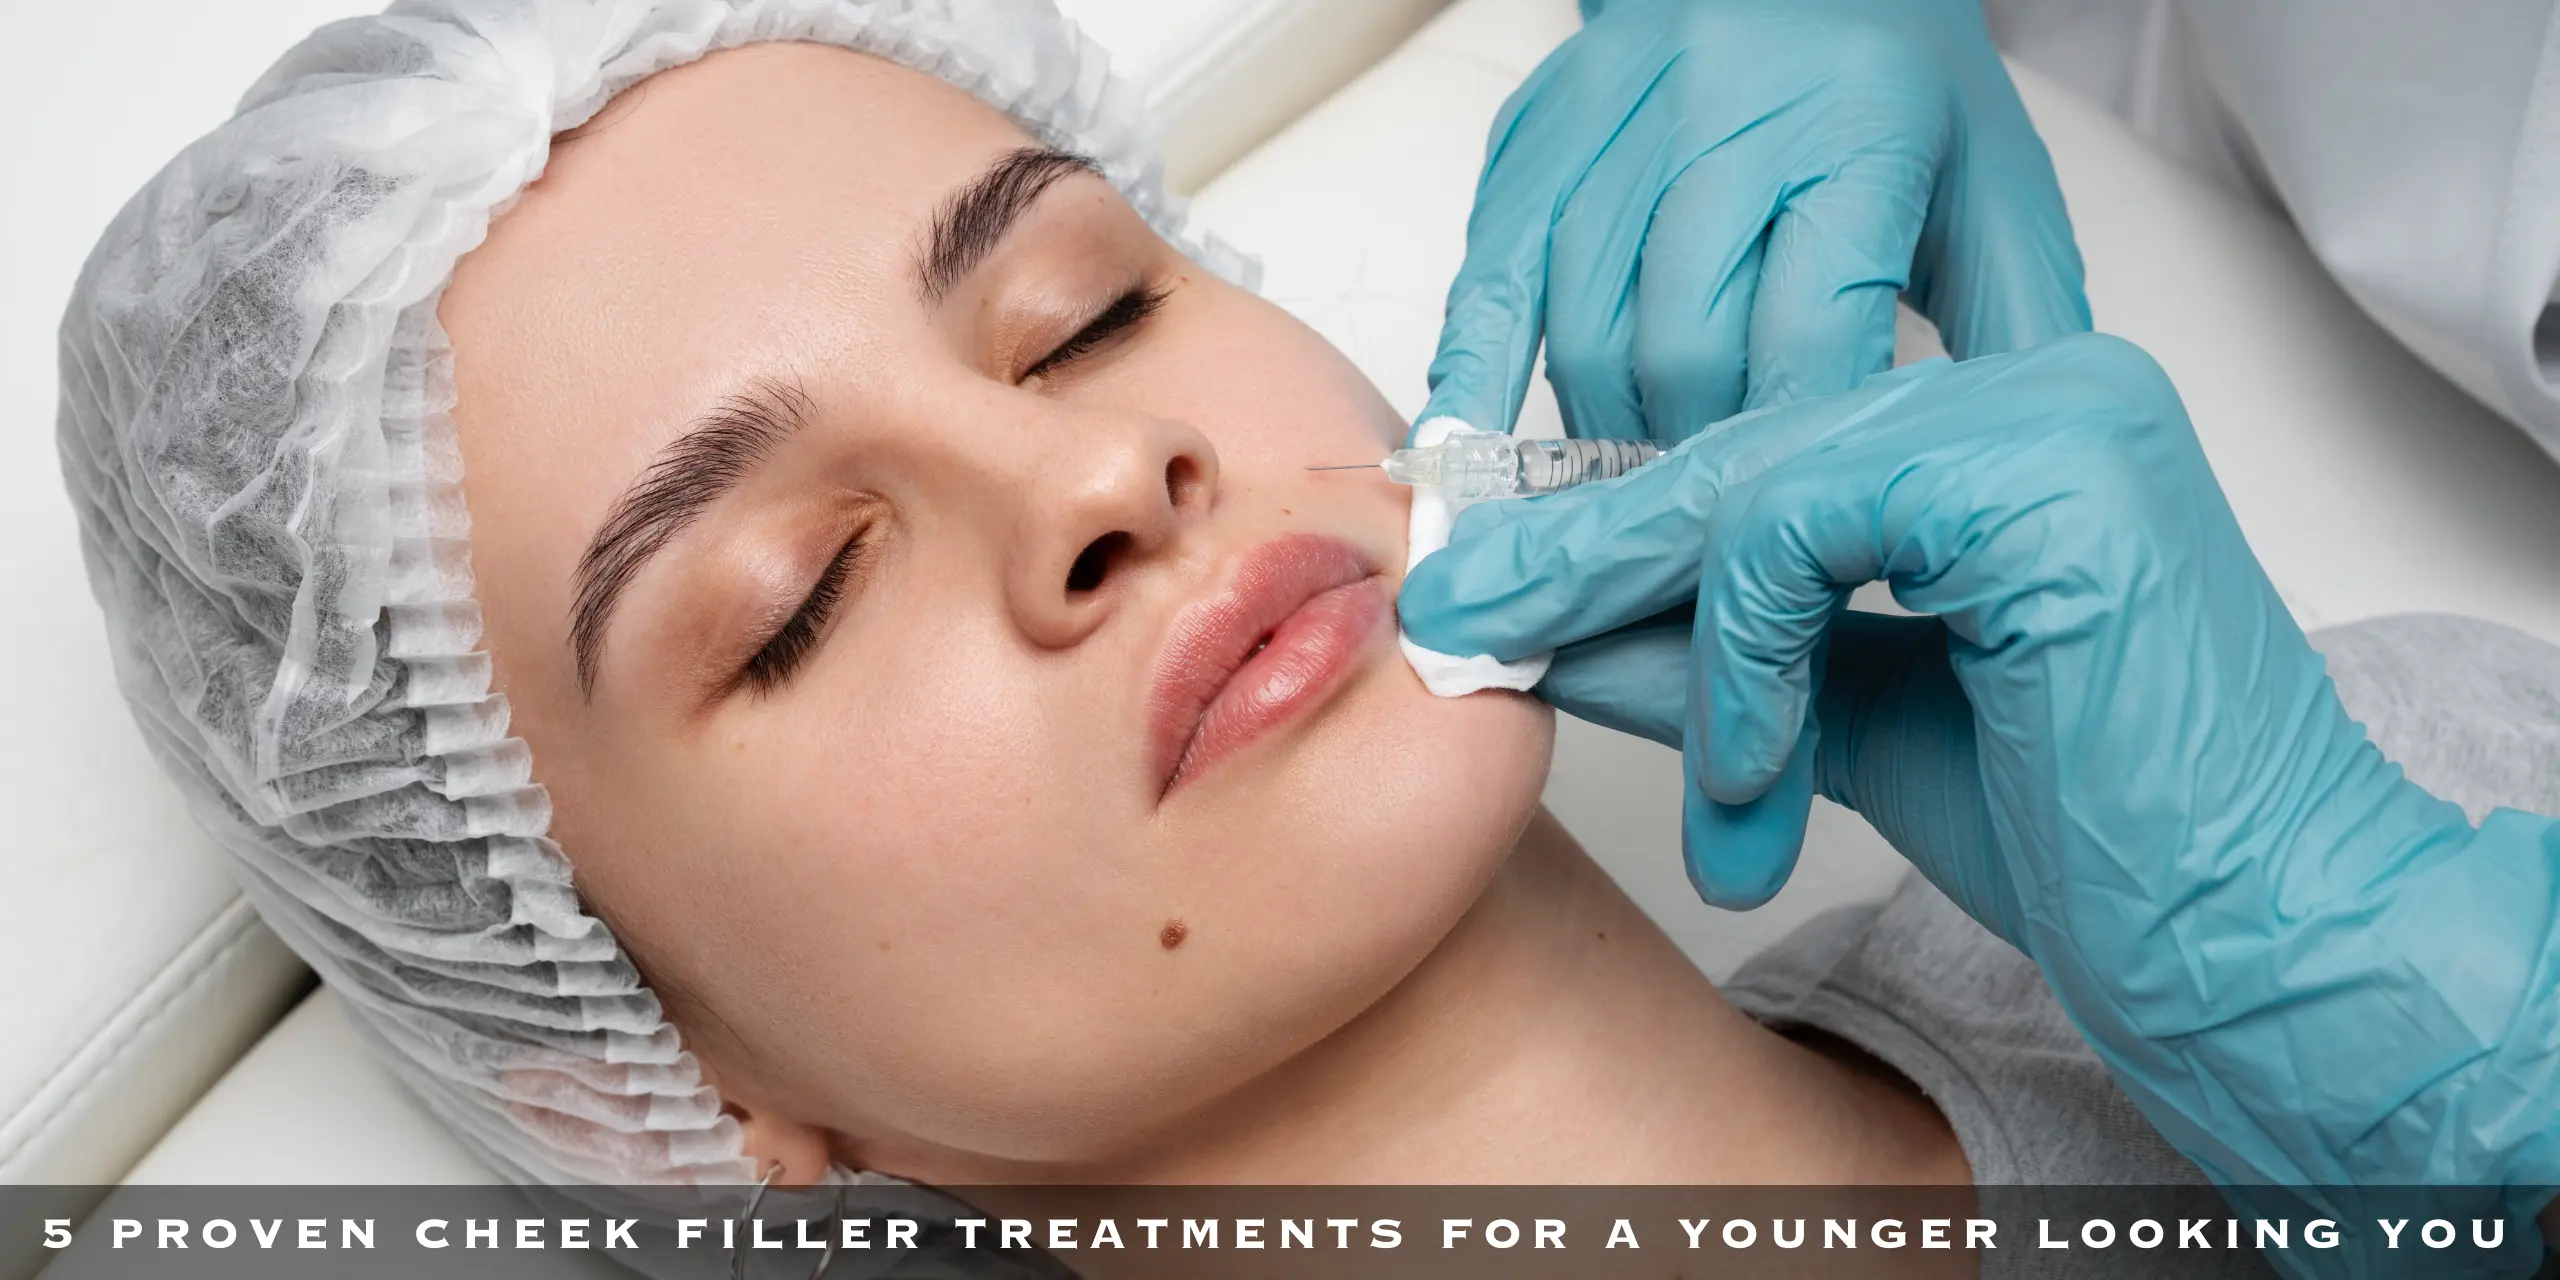 5 PROVEN CHEEK FILLER TREATMENTS FOR A YOUNGER LOOKING YOU